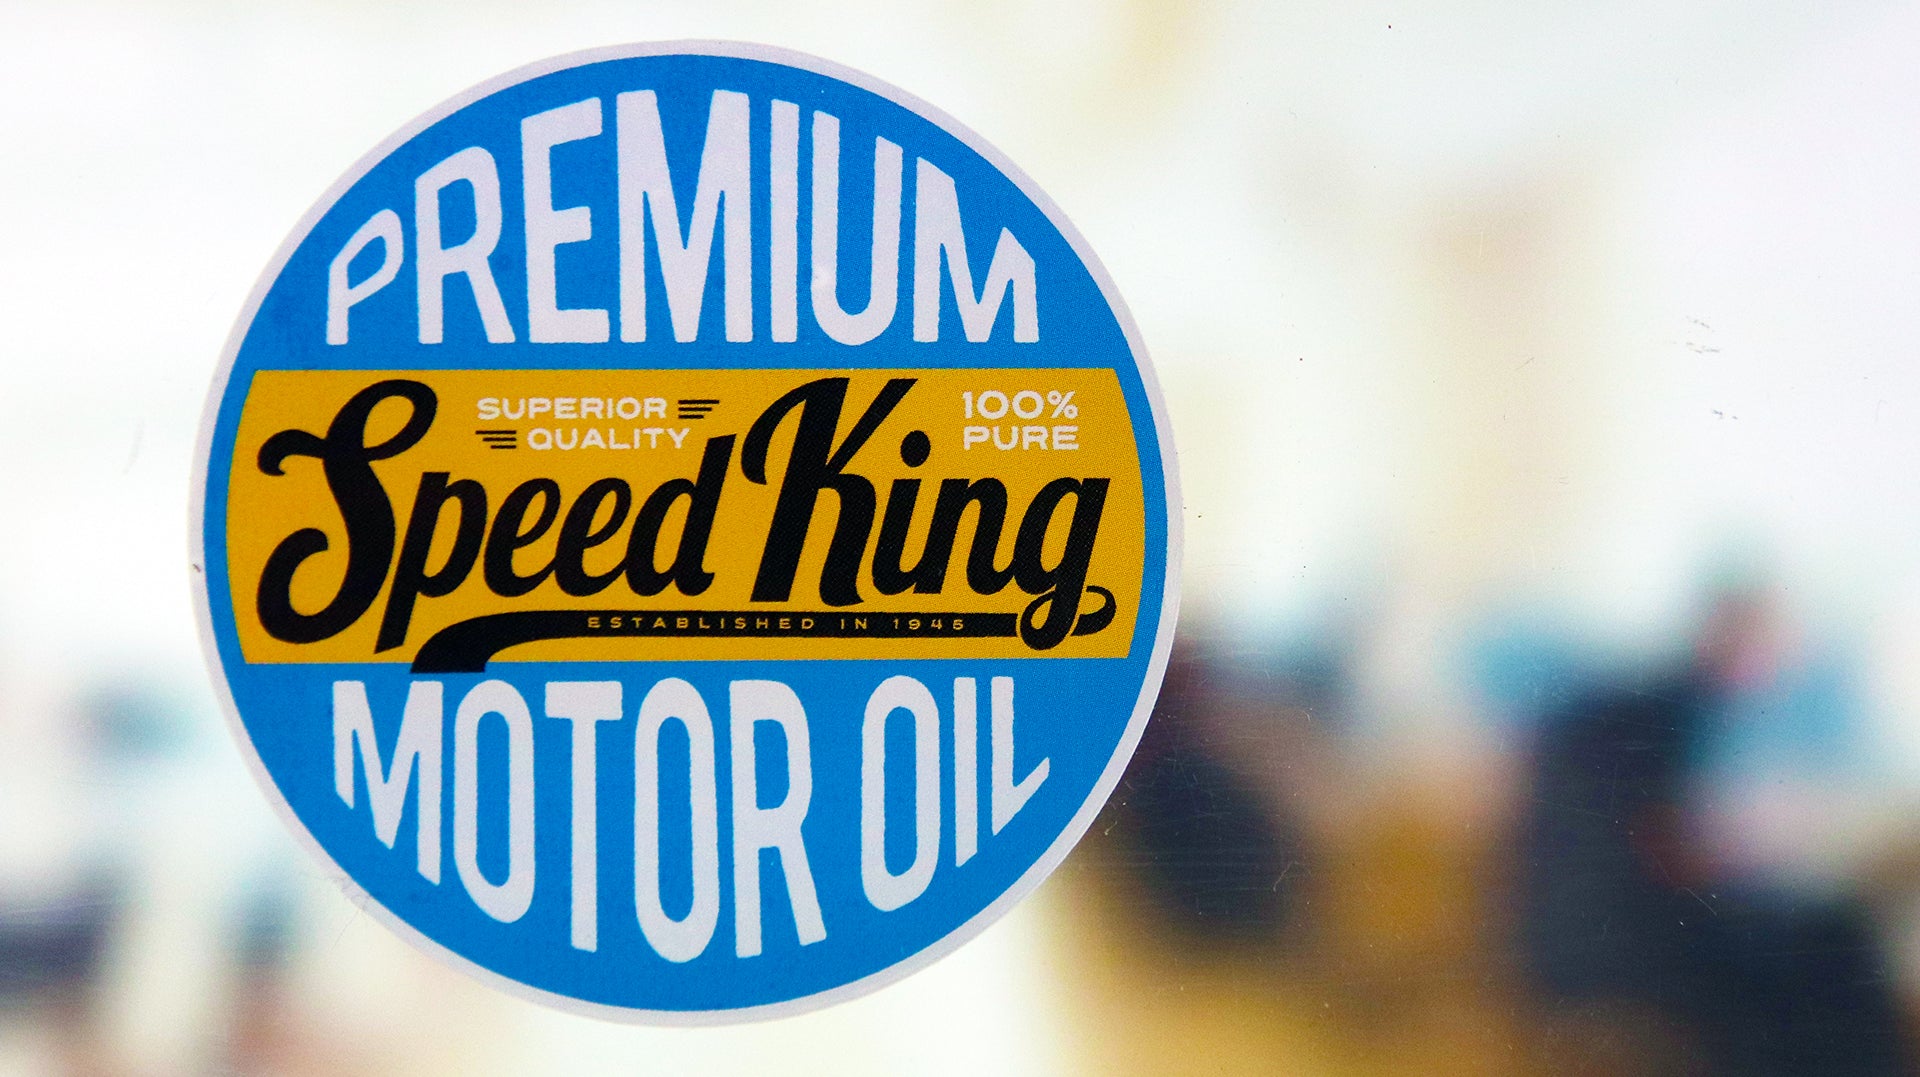 Eco-friendly front adhesive circle sticker with speed king logo applied to a window